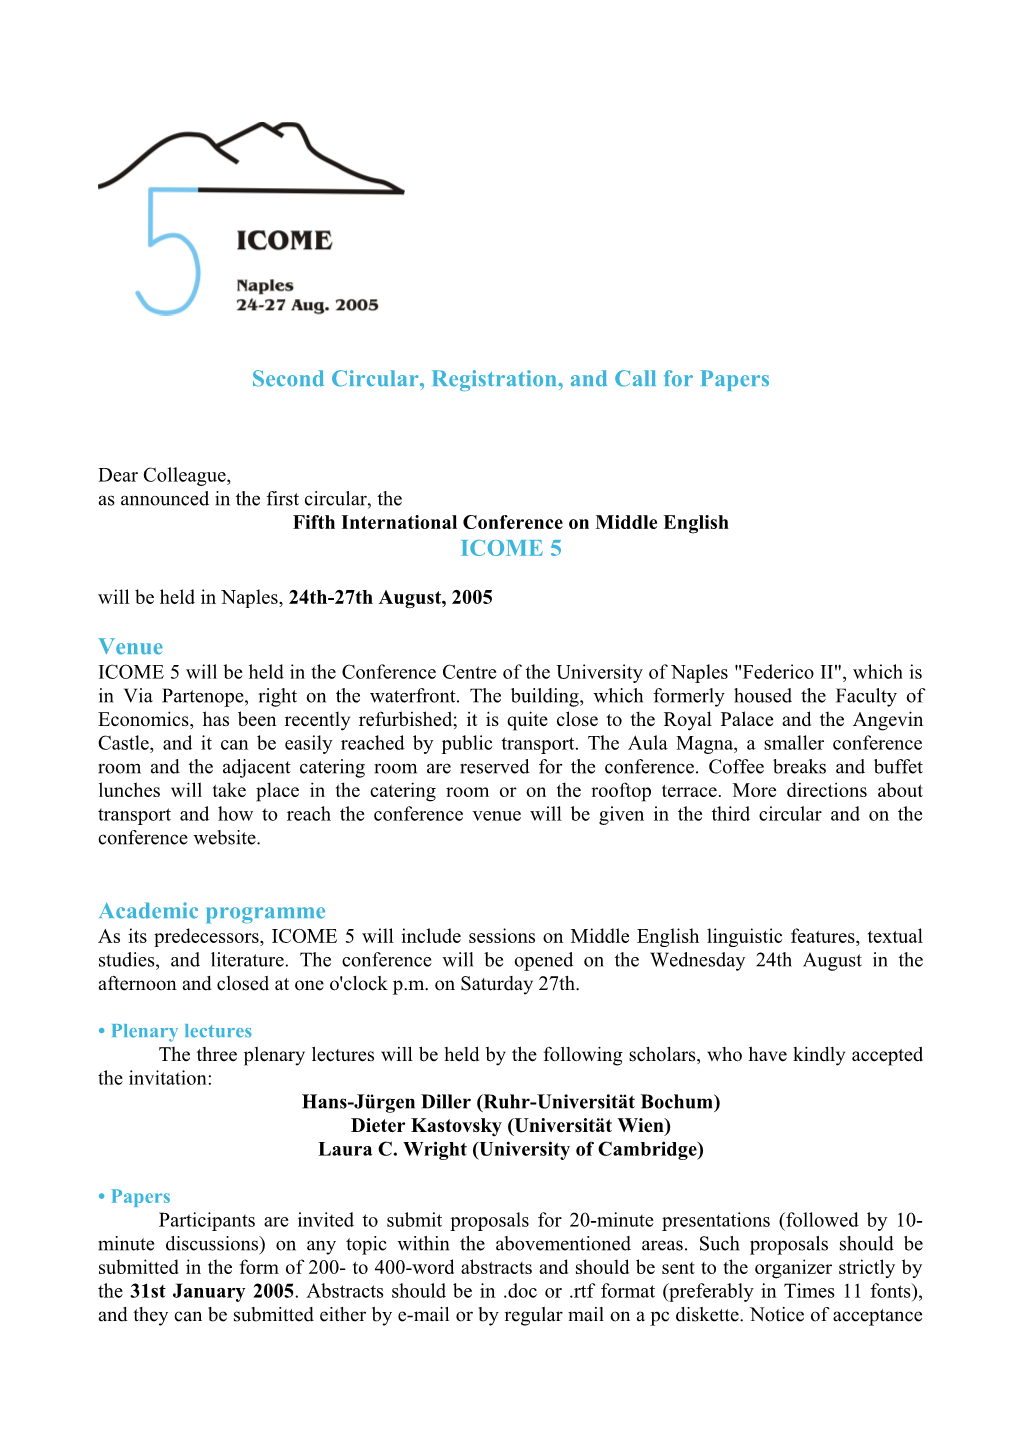 Second Circular, Registration, and Call for Papers